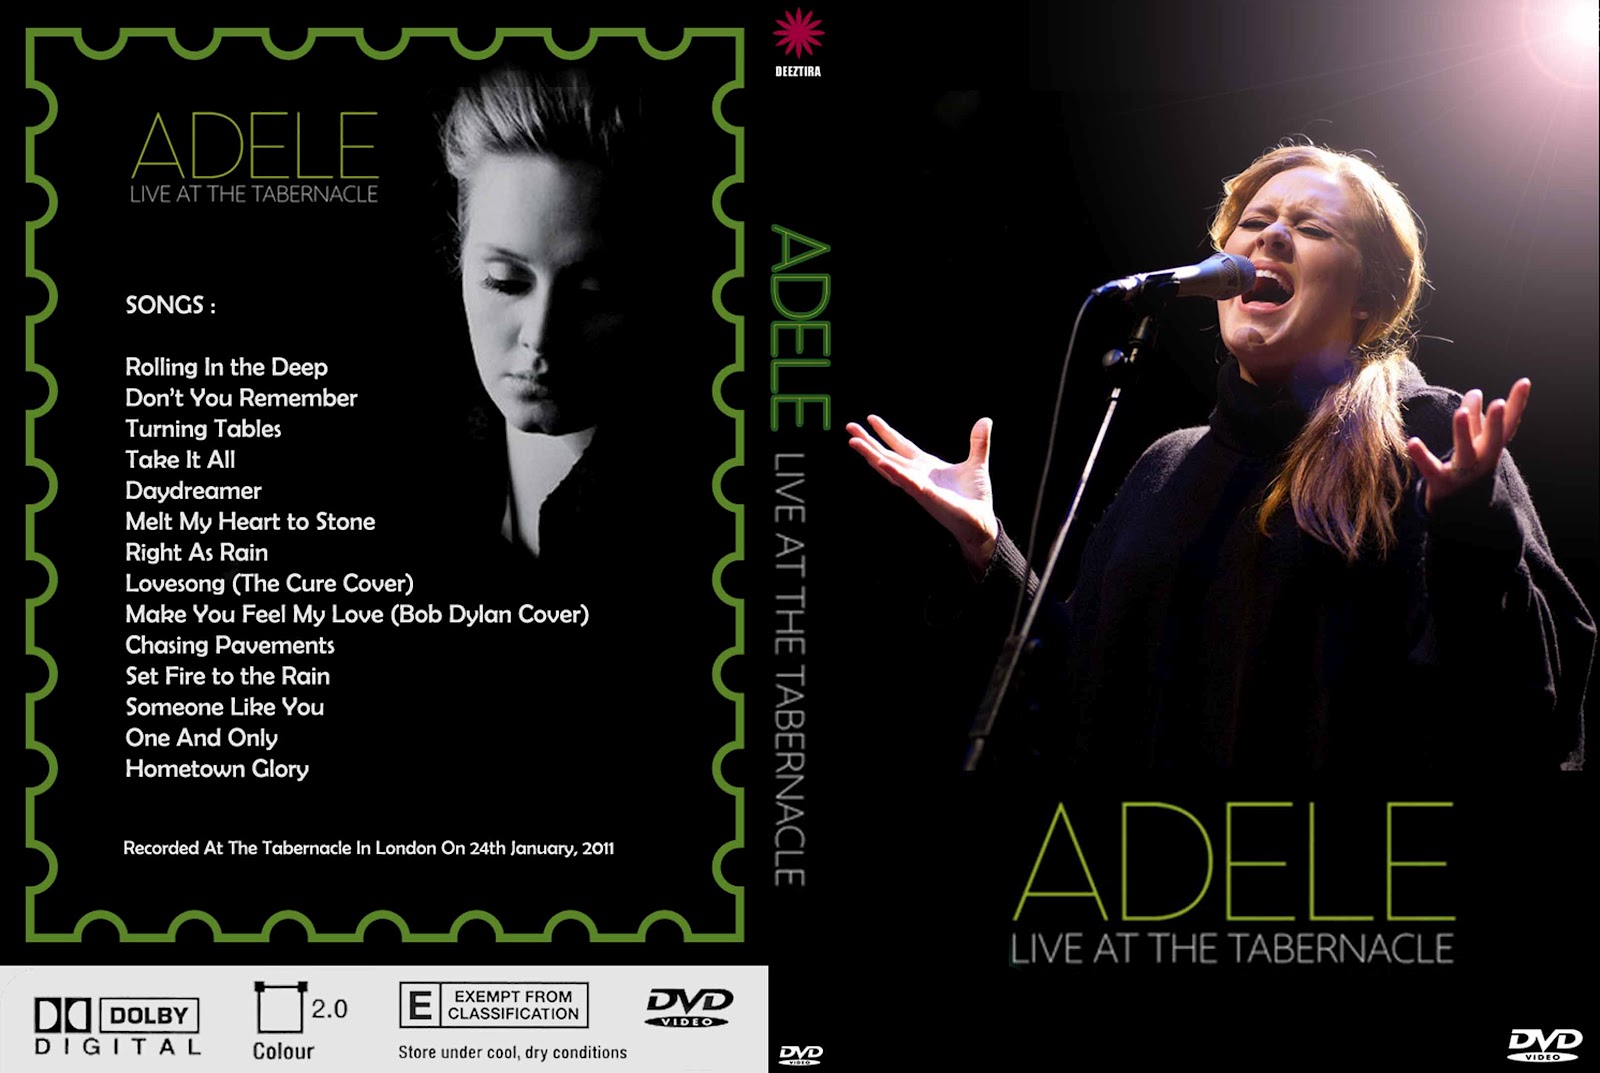 ADELE - Live At The Tabernacle 2011